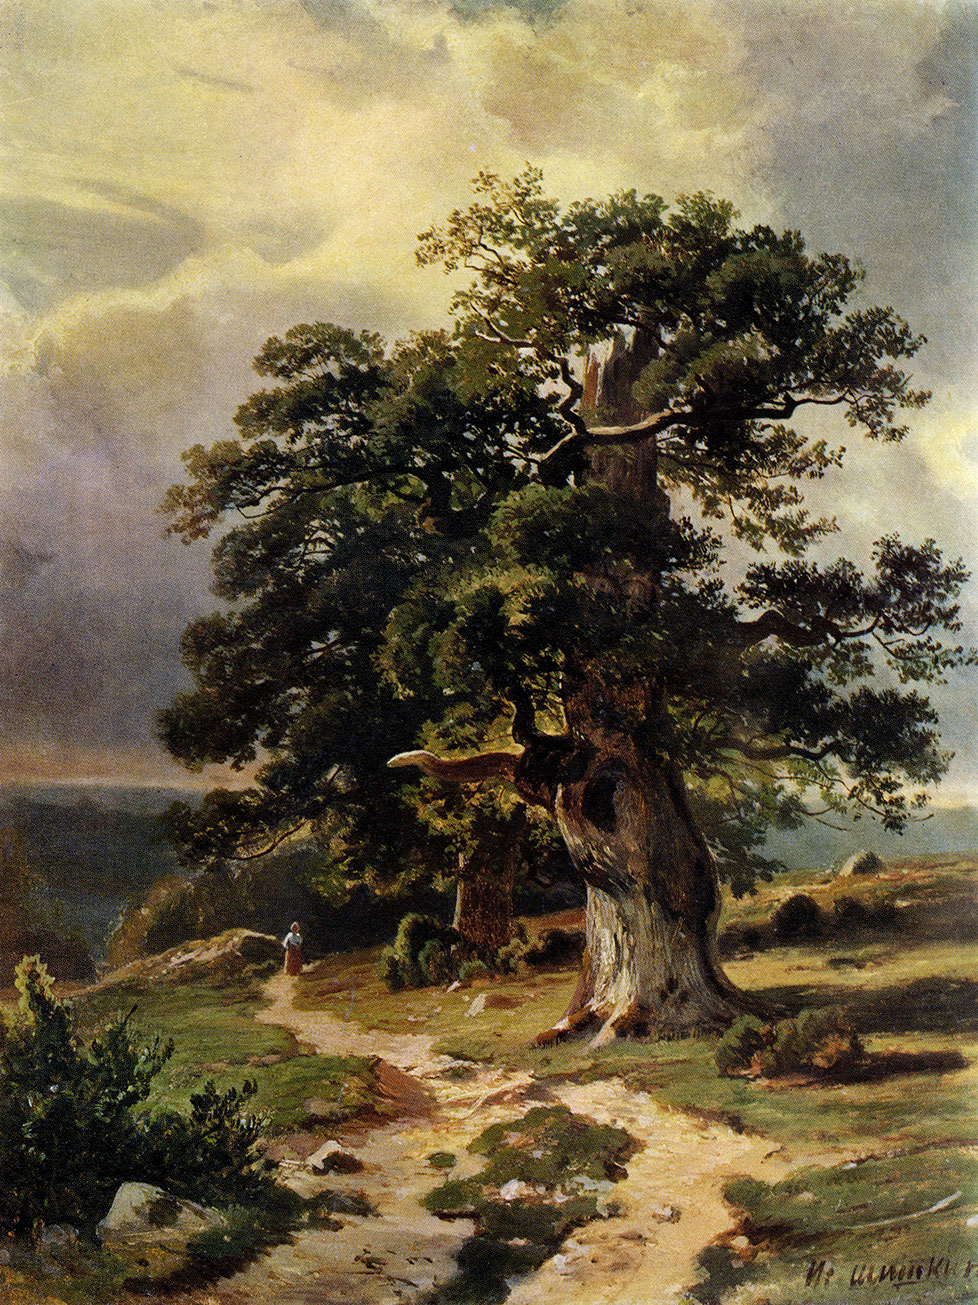 19. Oaks. Study for View in the Vicinity of Dusseldorf (1865). Oil on panel. 41.5X34.5 cm. The Russian Museum, Leningrad